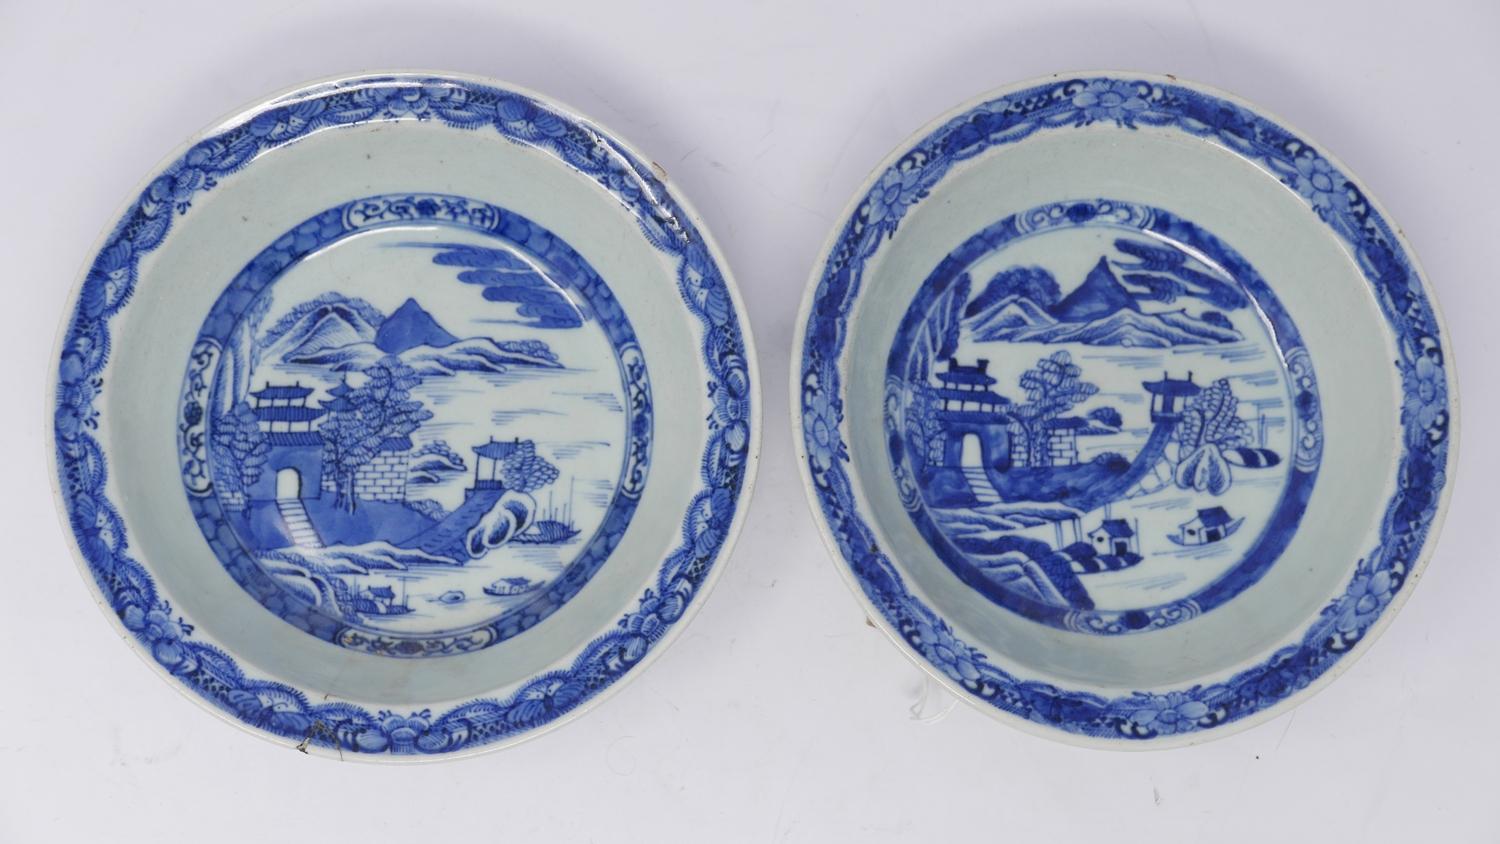 A pair of 19th century Chinese blue & white porcelain bowls, with willow pattern, one repaired